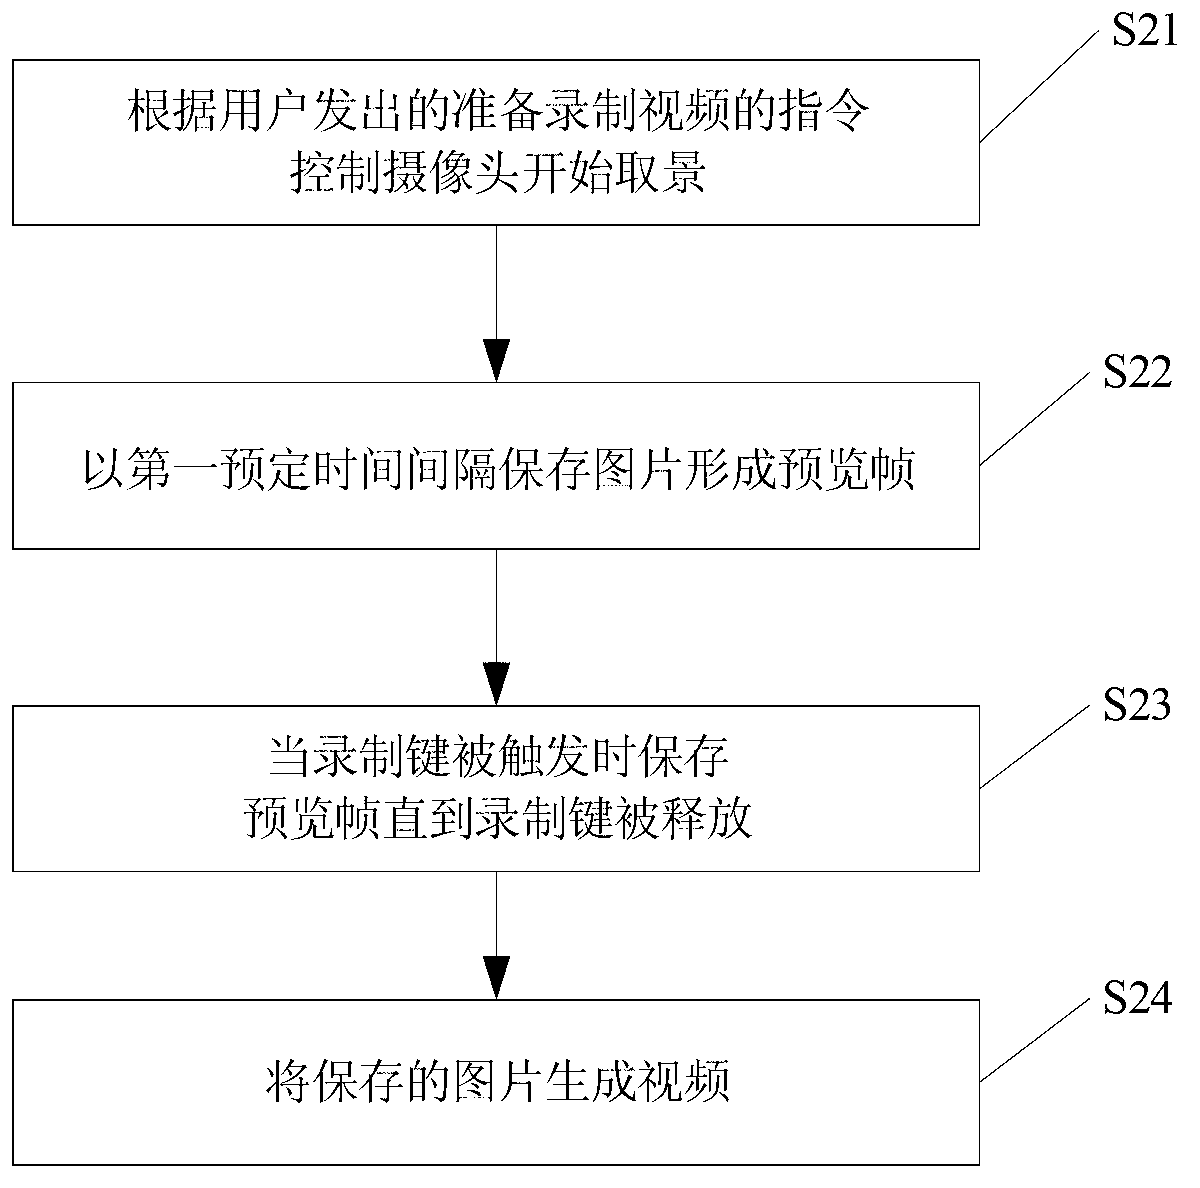 Method and device for recording video and generating GIF (Graphic Interchange Format) dynamic graph